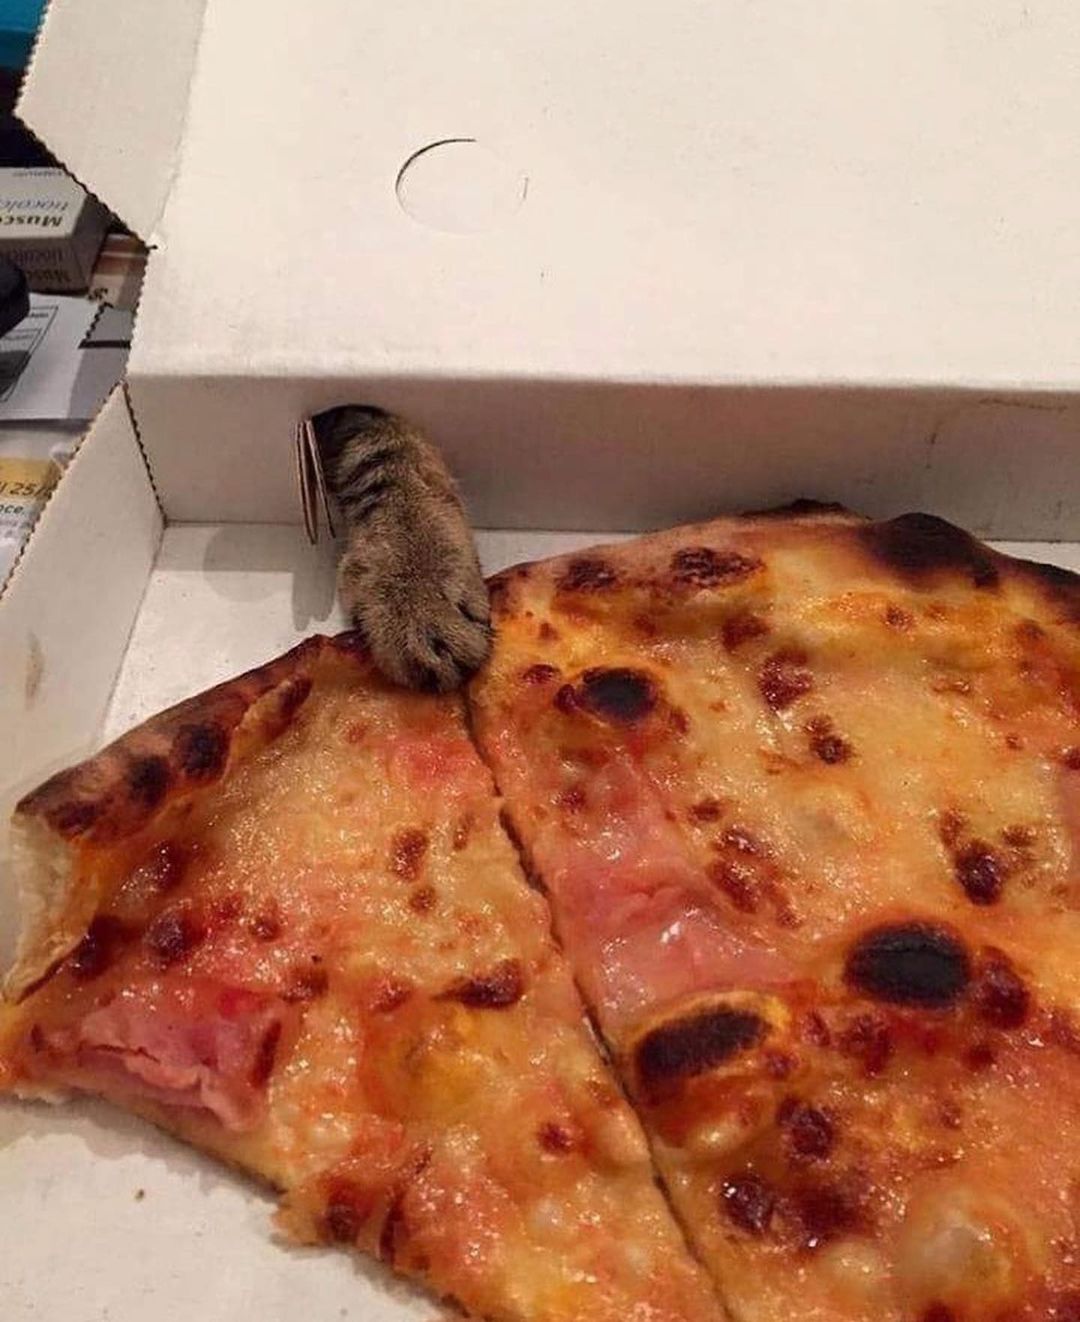 a cat paw reaching through the back of a pizza box, grabbing at a pizza